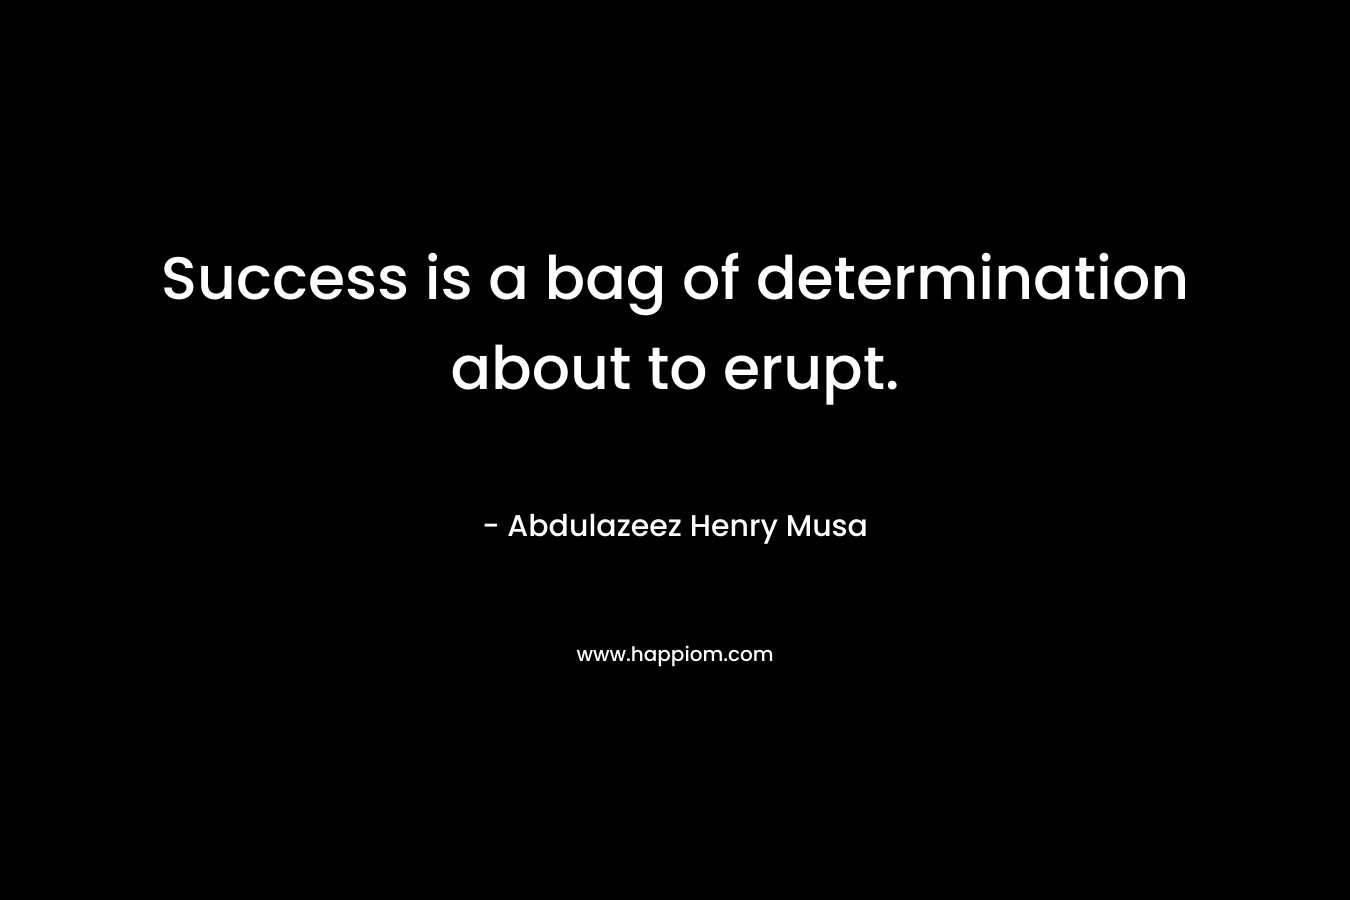 Success is a bag of determination about to erupt.